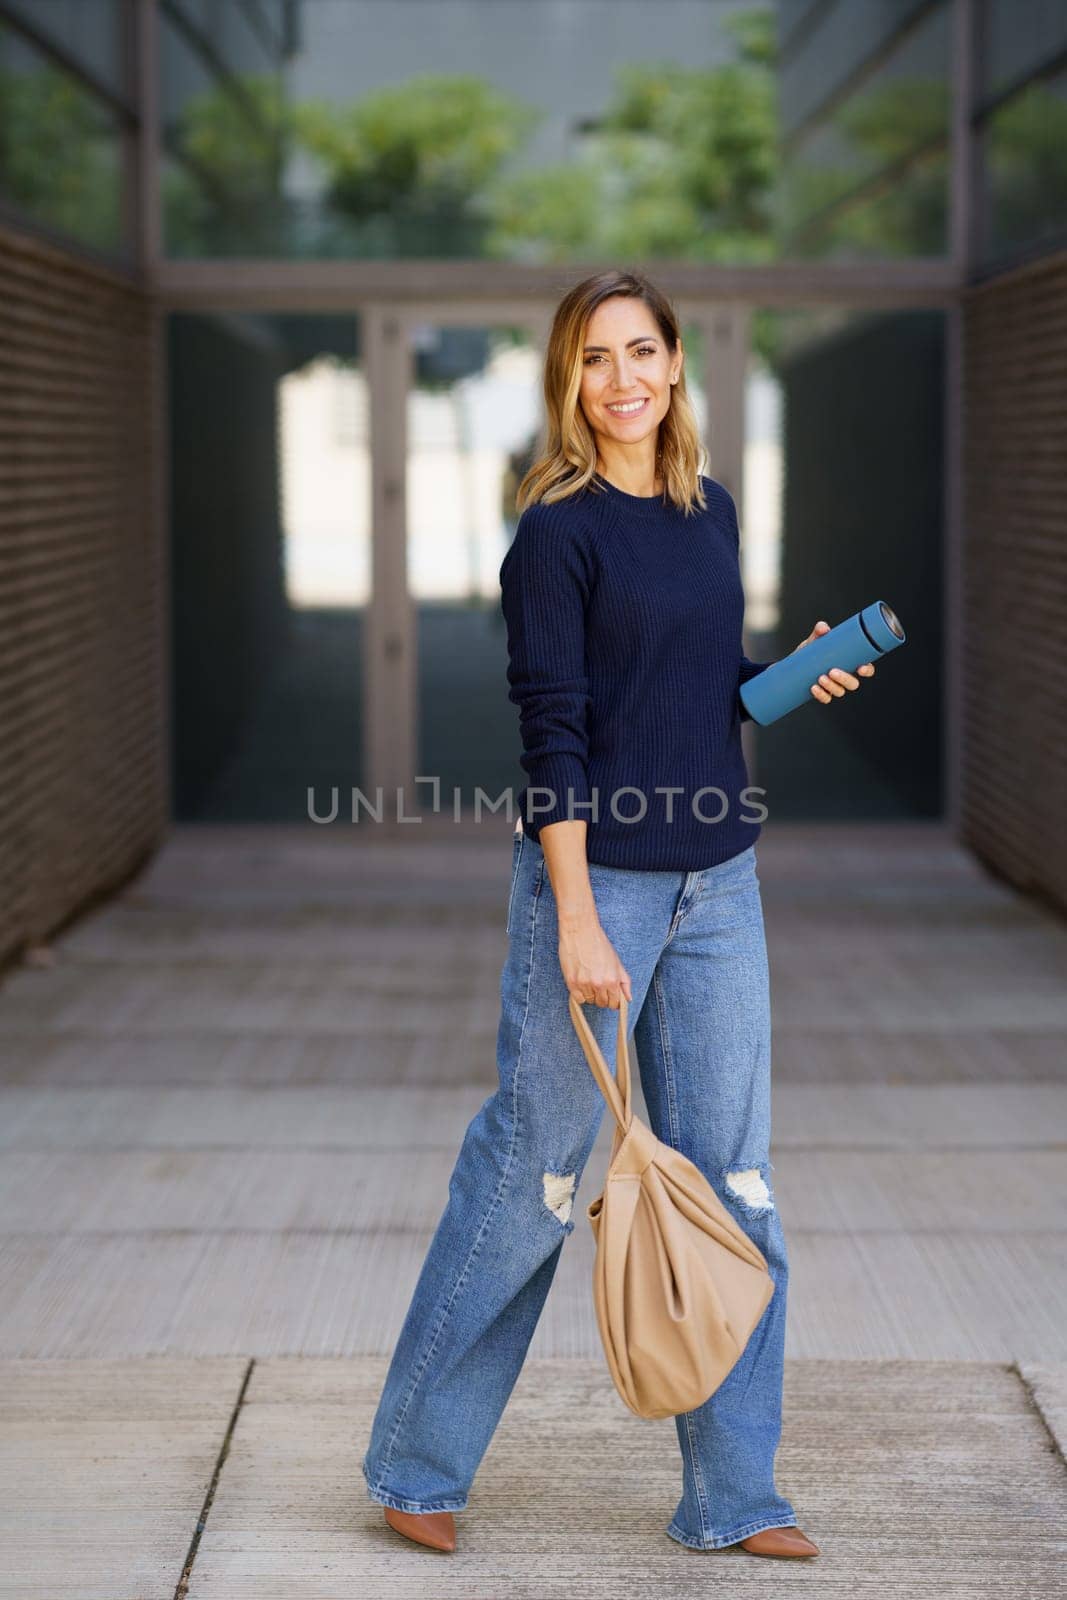 Full body happy woman, in stylish clothes with bag and thermos looking at camera with smile and walking on pavement outside modern apartment building on city street